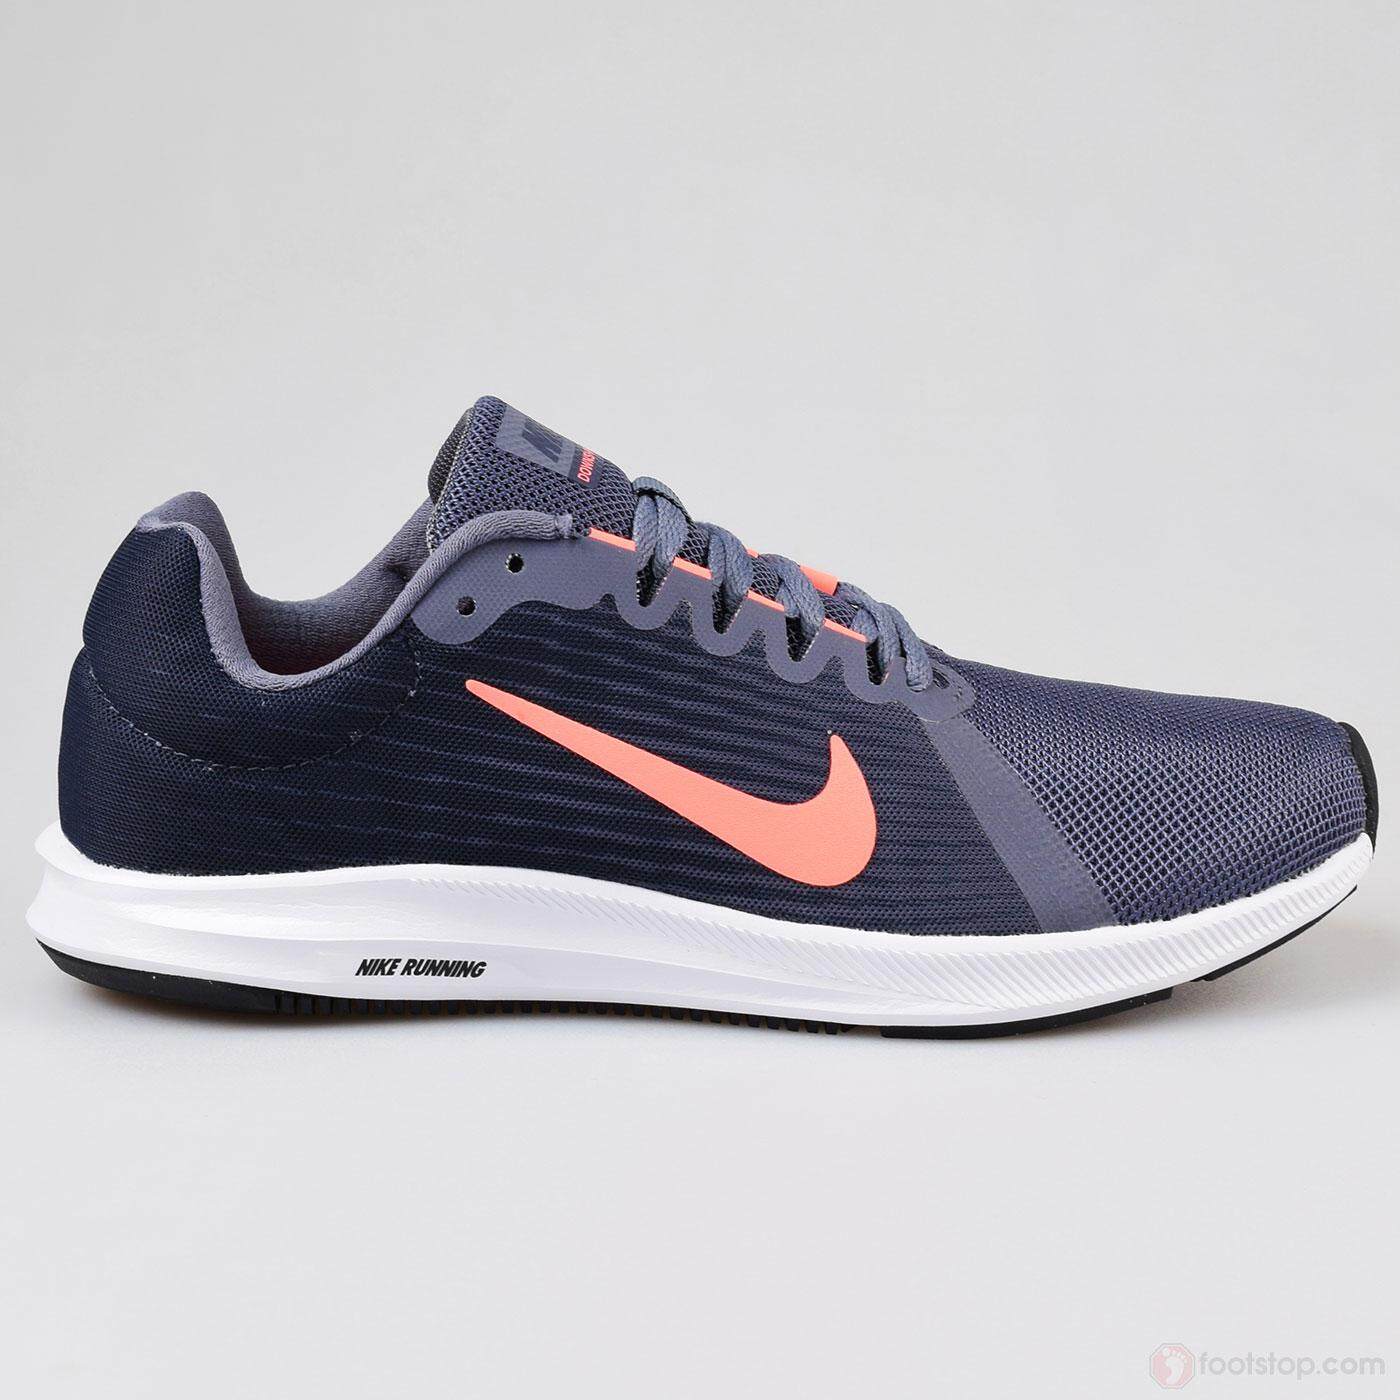 nike sport shoes price in malaysia 